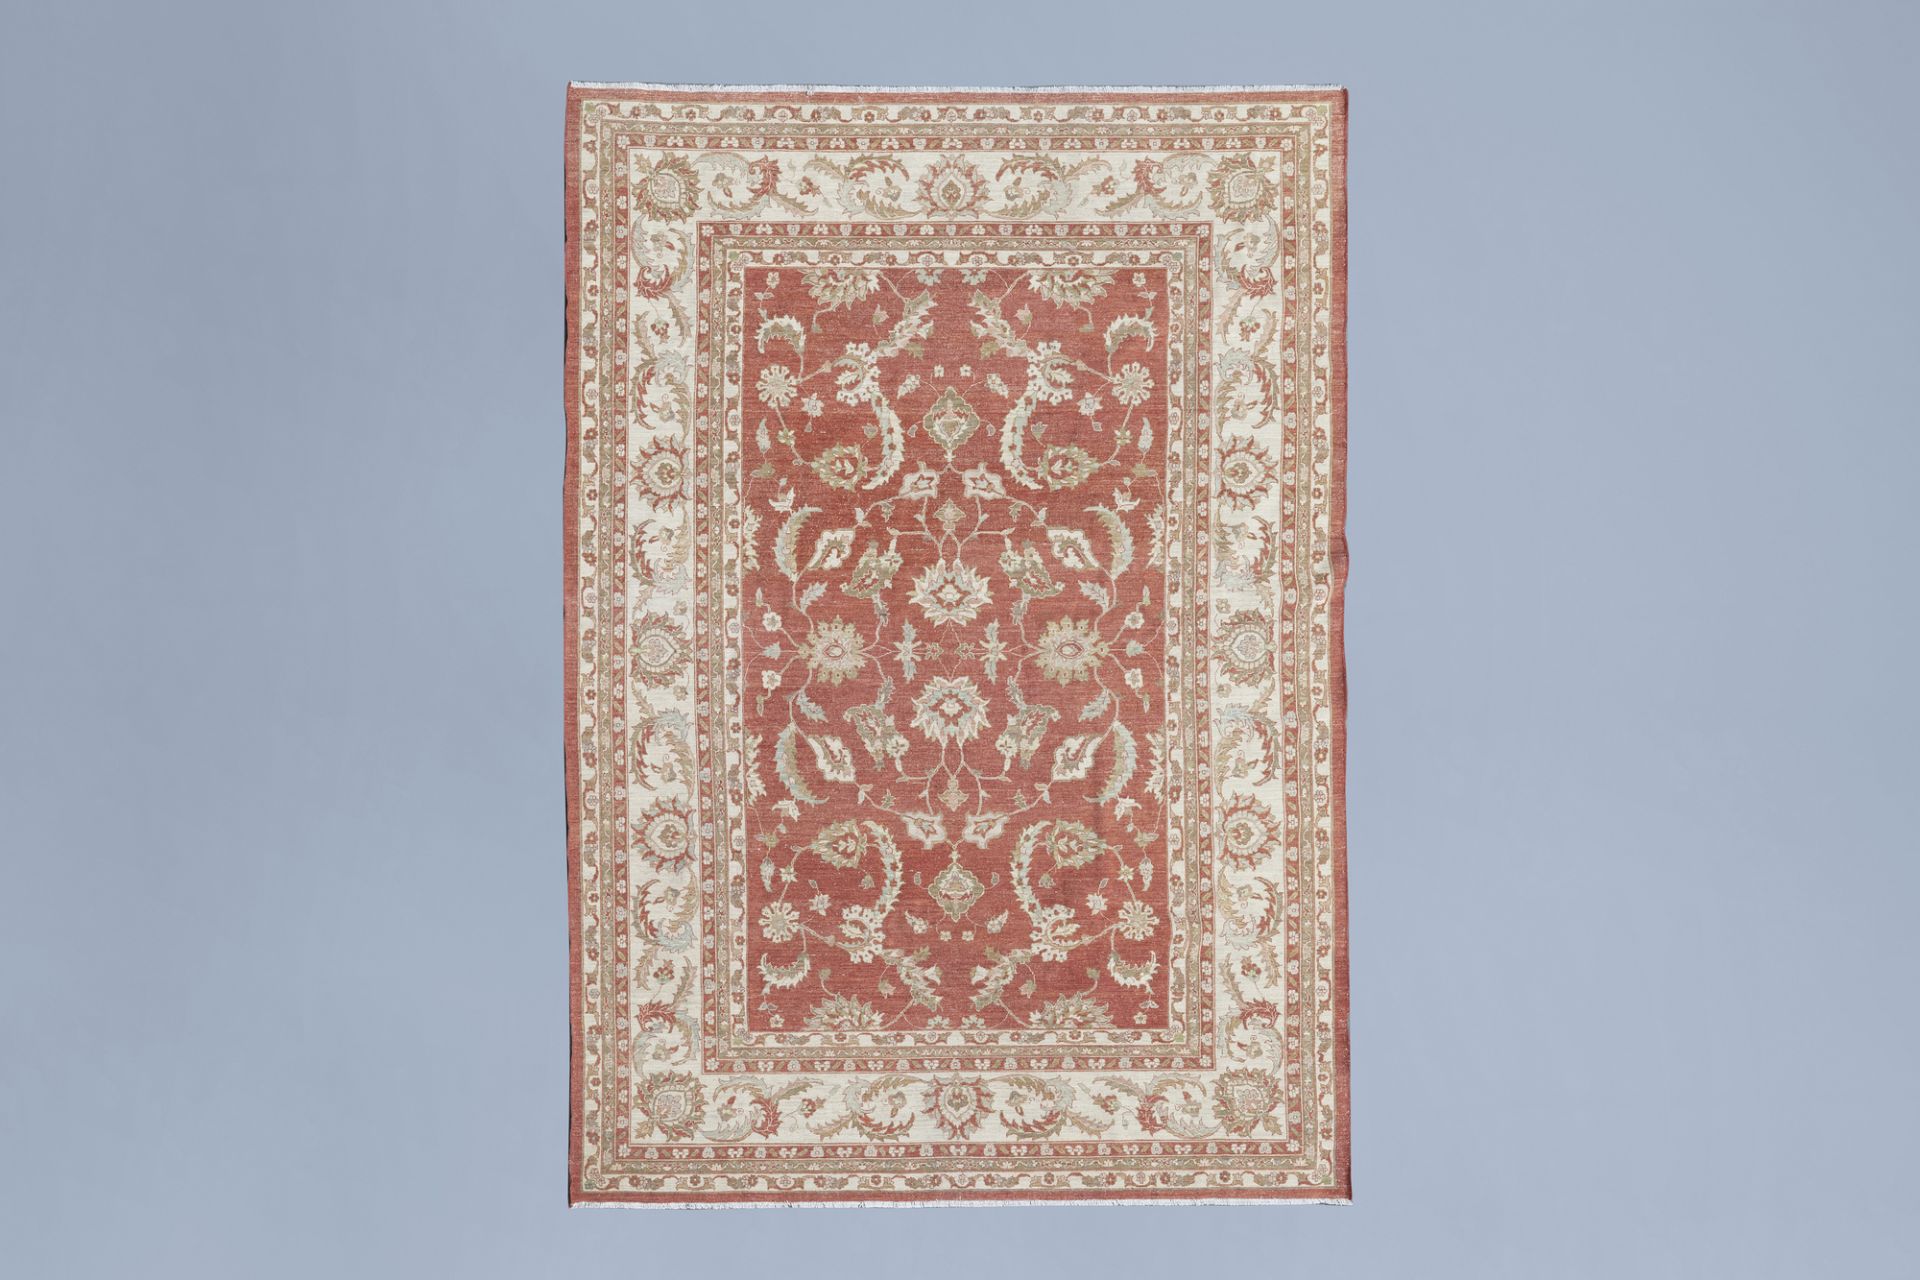 An Afghan rug with Ziegler design, wool on cotton, mid 20th C. - Image 2 of 3